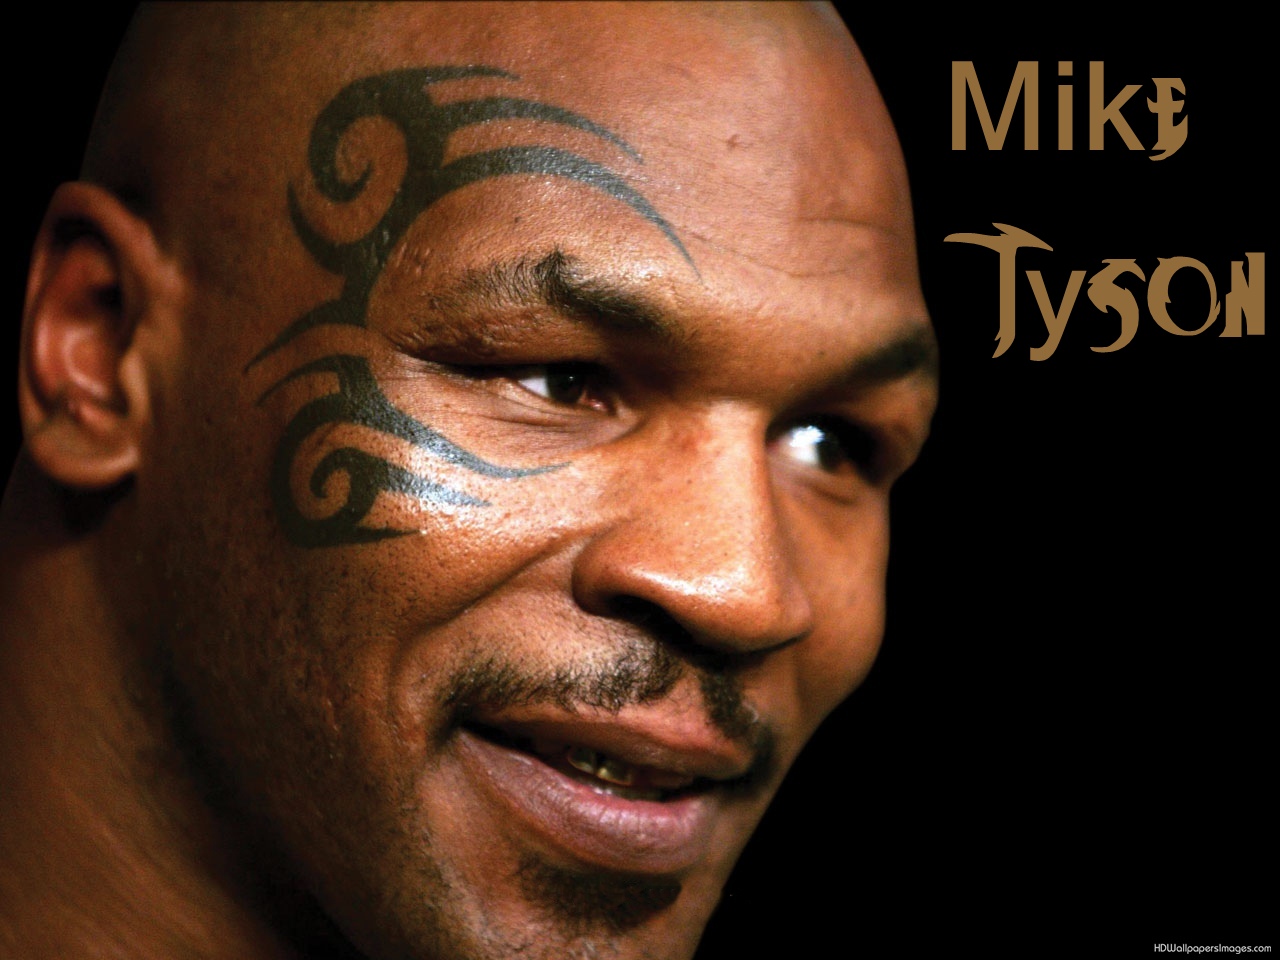 In 1981 and 1982 Mike Tyson had won gold medals in Junior Olympic Games. Tyson did his professional career debut in 1985 at Albany, New York.